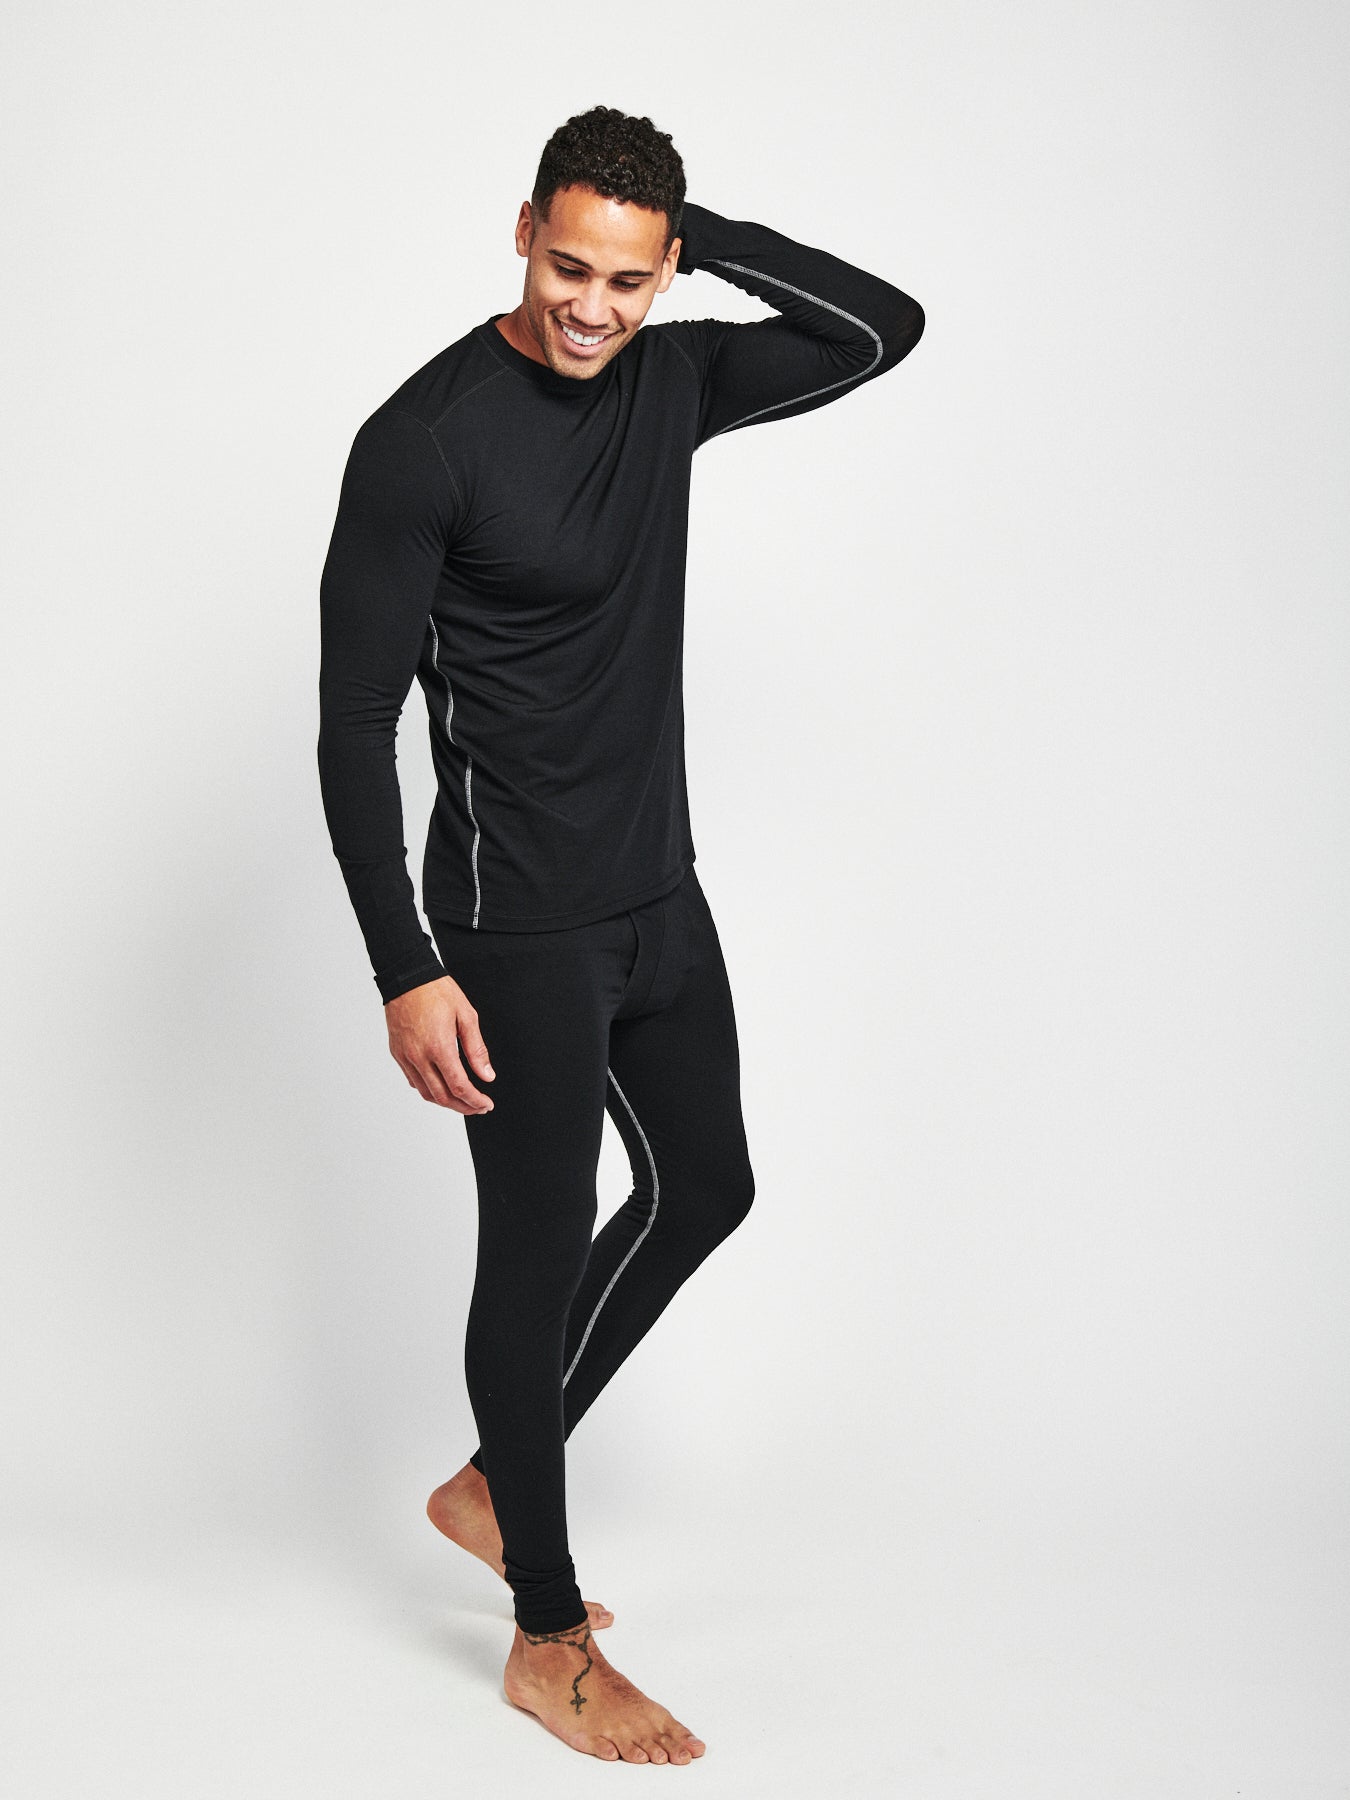 Tasc Performance Bamboo and Merino base layers review